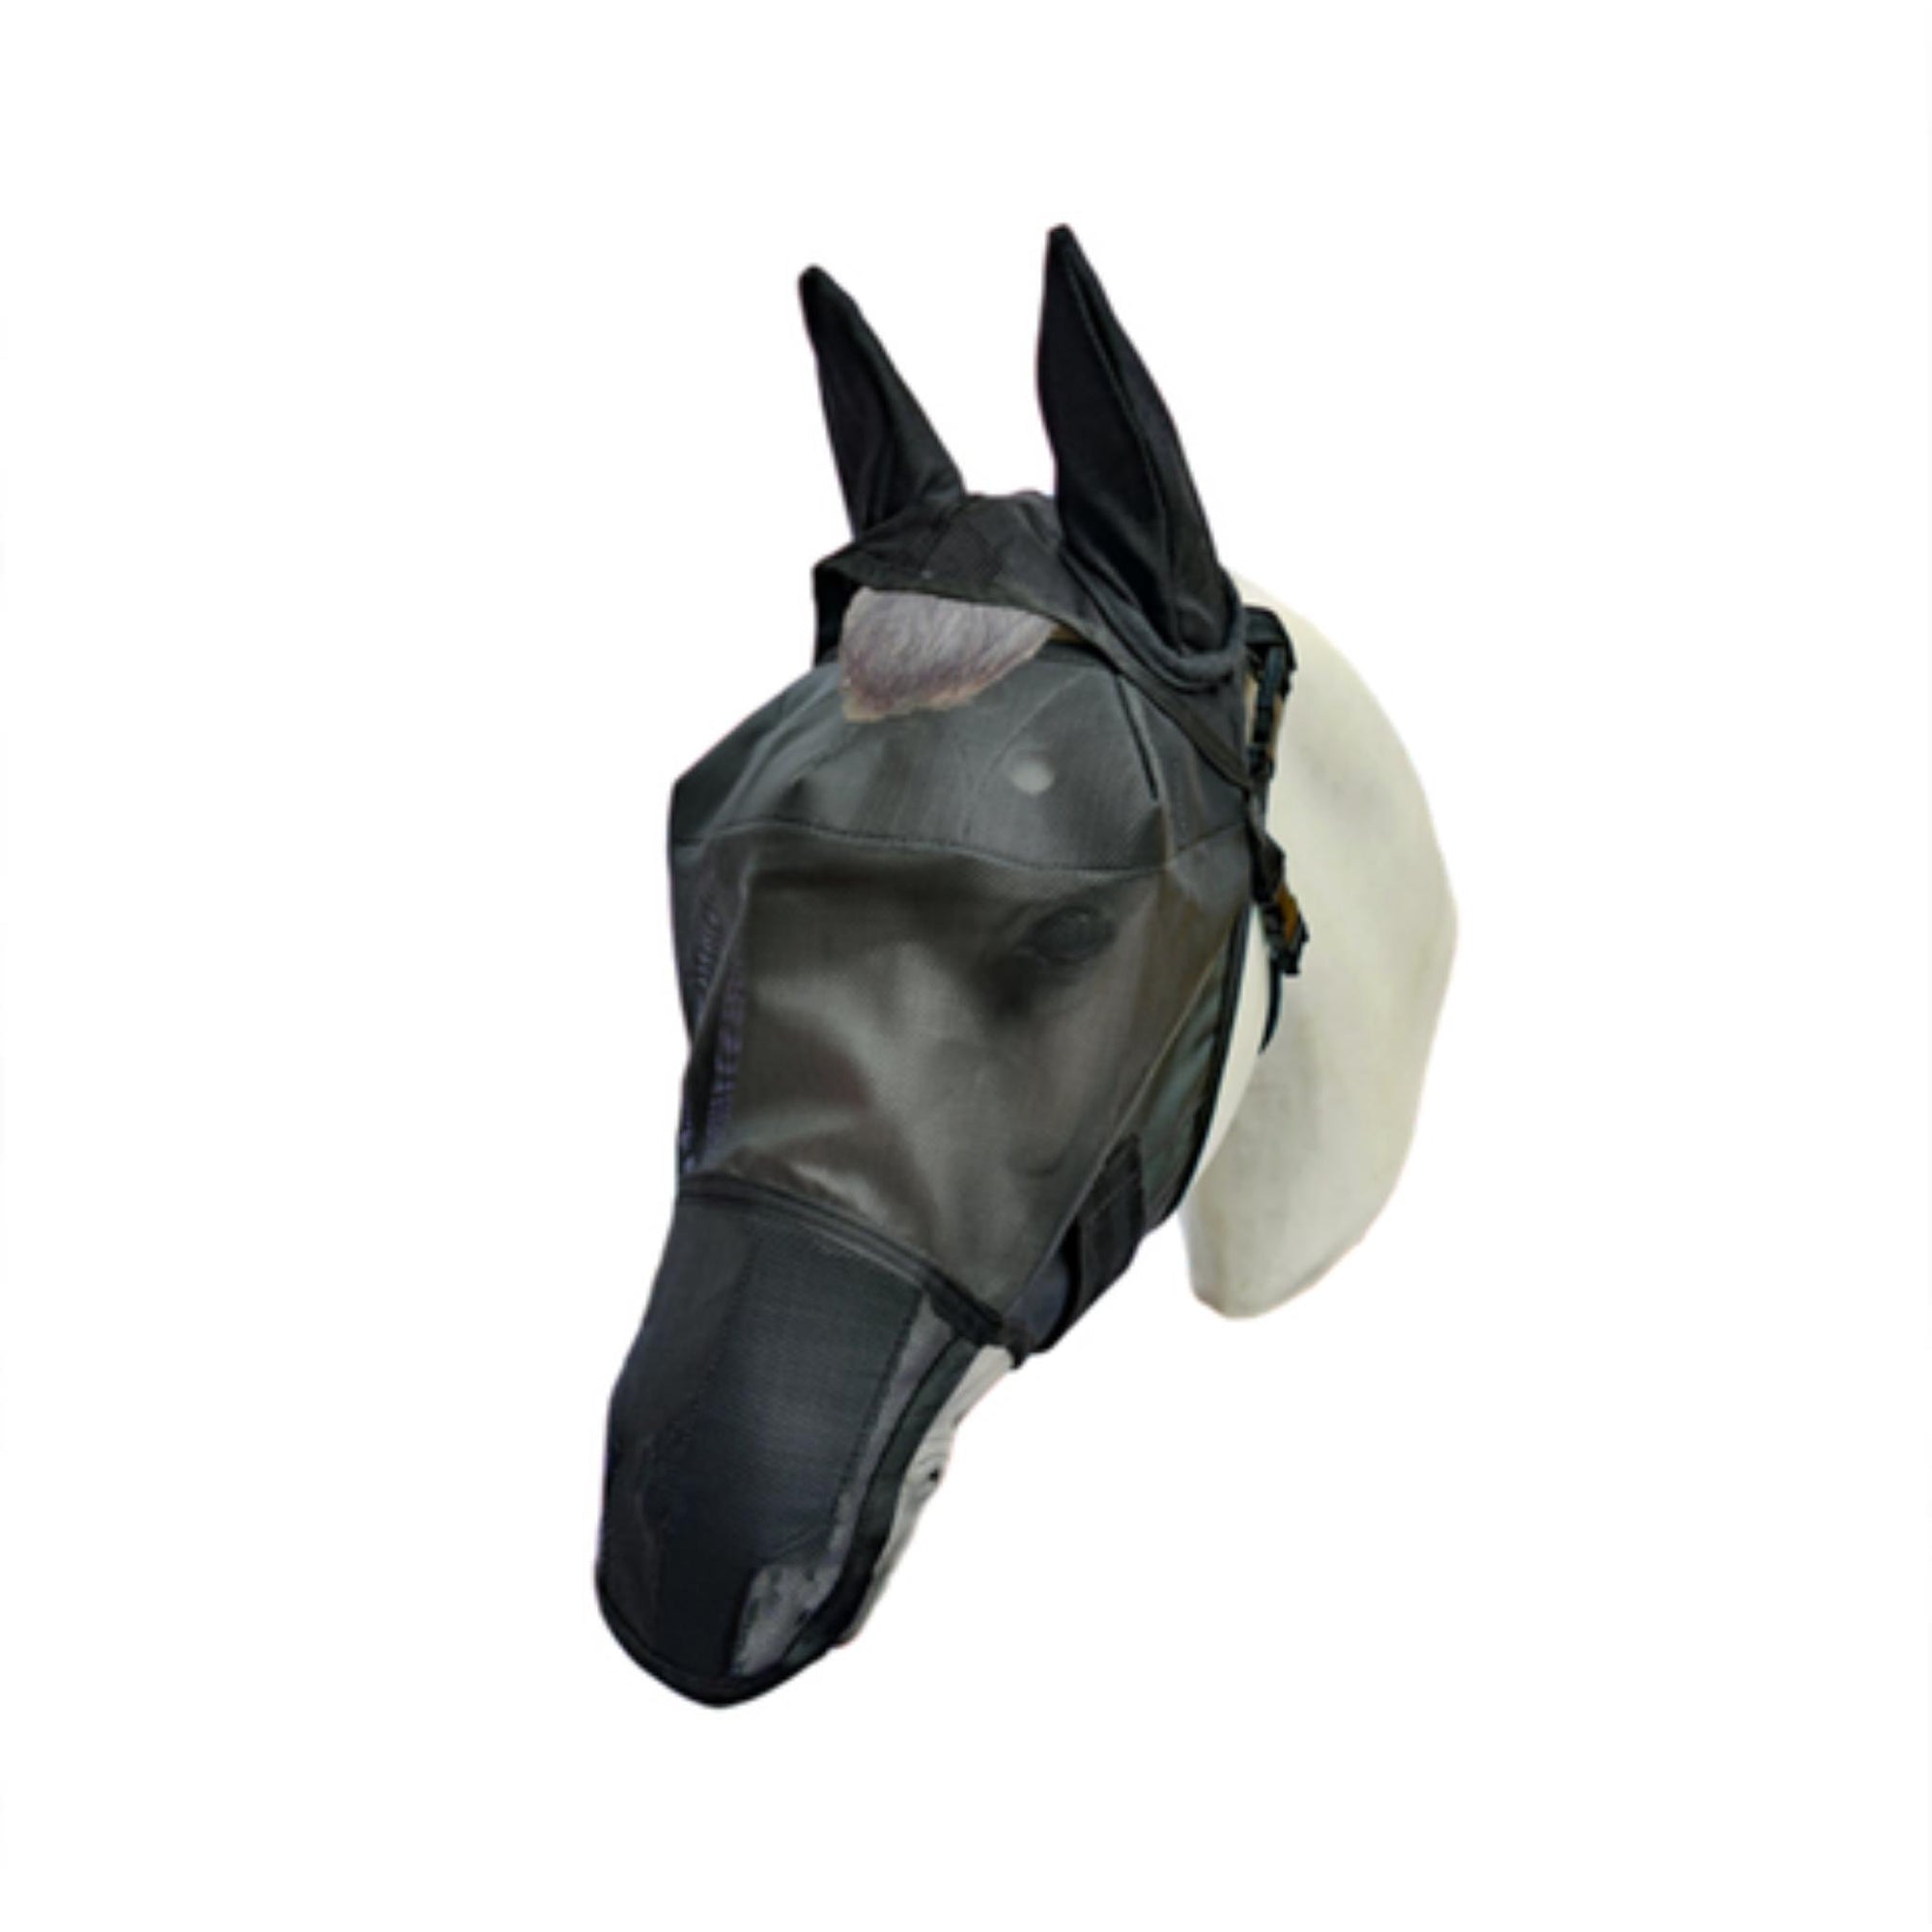 Horse model wearing black fly mask with ear coverings and nose flap.